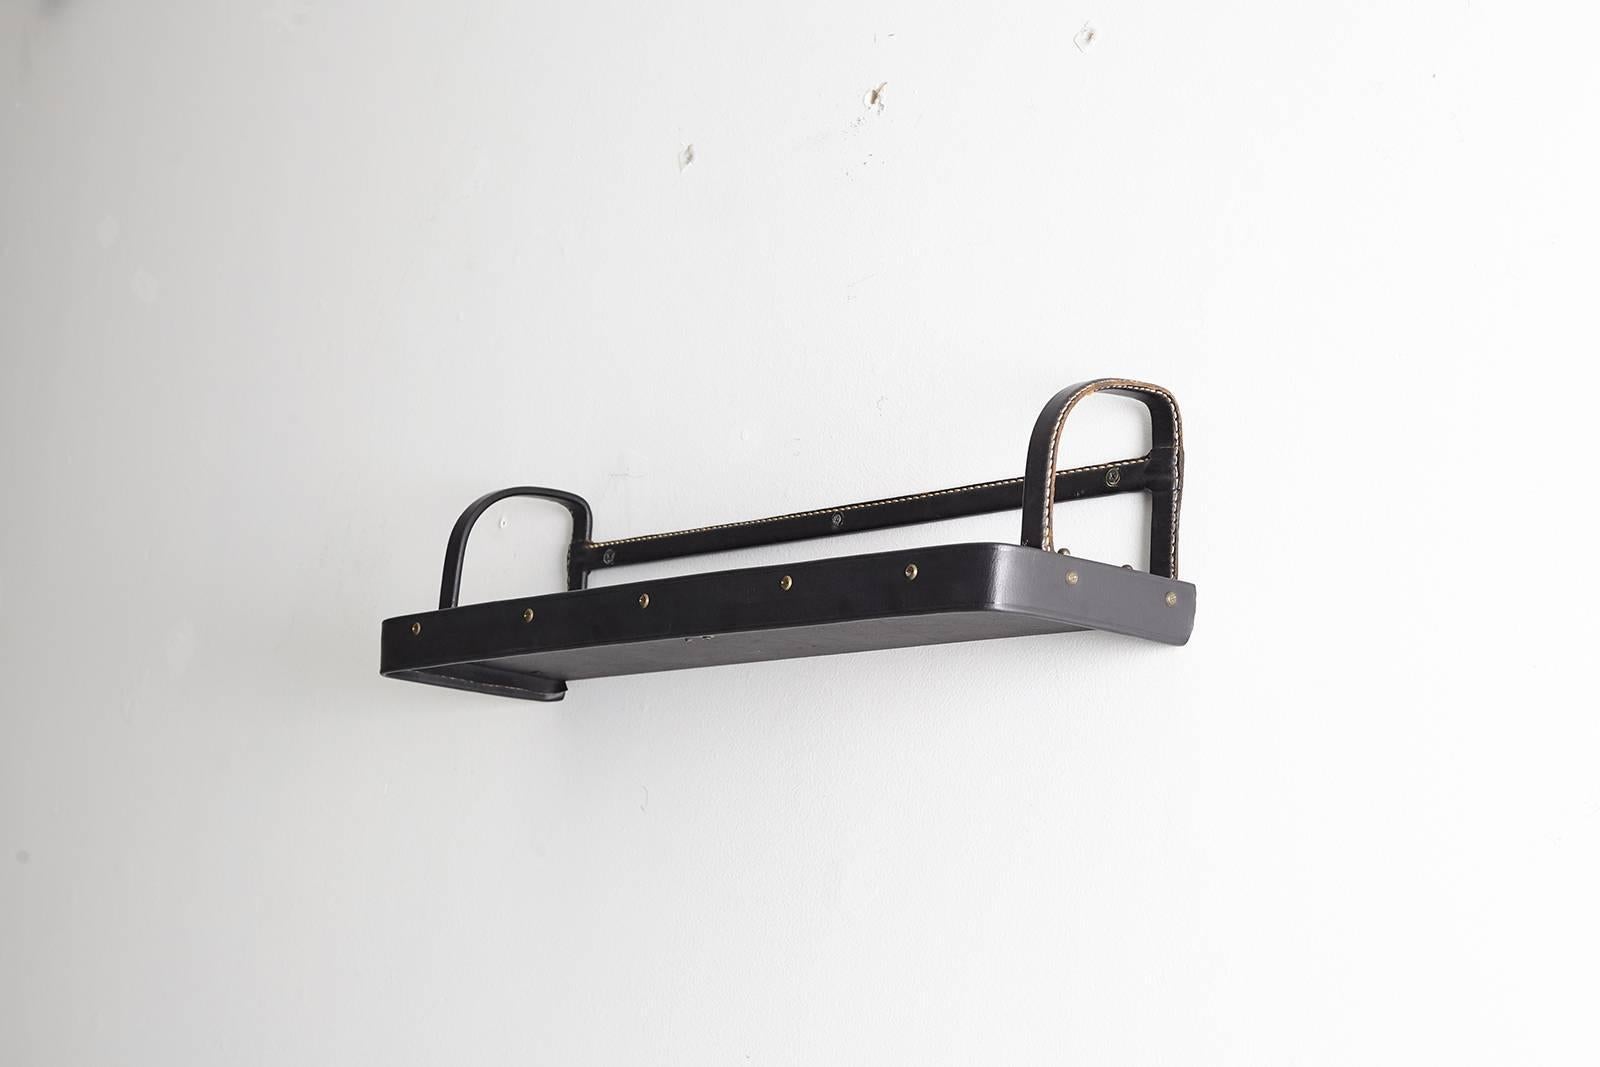 Handsome wall shelf and book holder by Jacques Adnet. Black leather and white contrast stitching with brass hardware. Nice age and patina to leather.